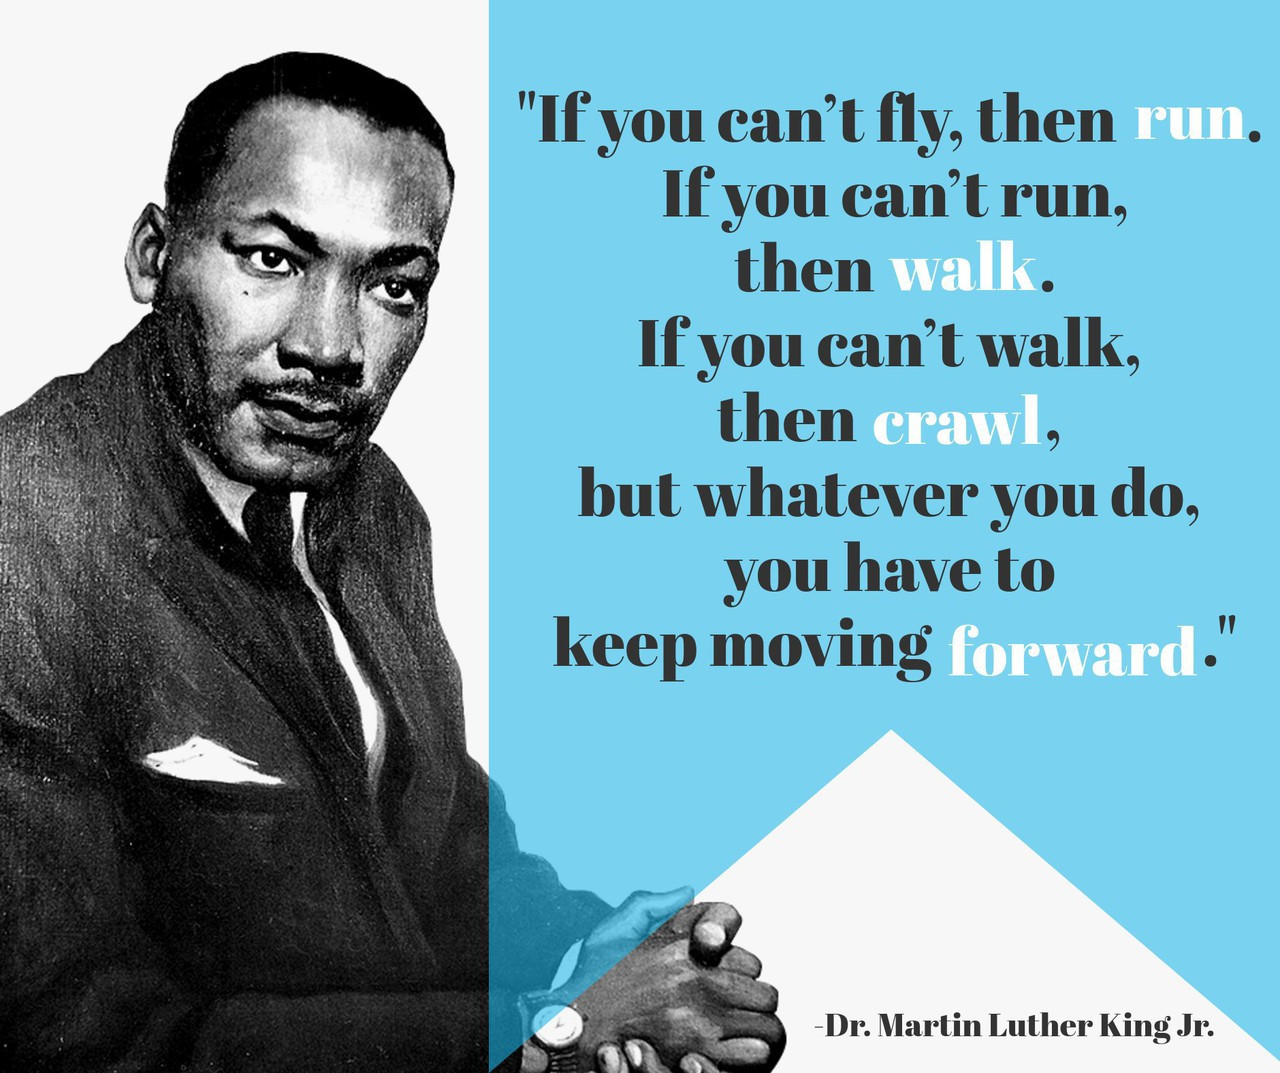 Mlk Quotes On Leadership
 10 Inspirational Leadership Quotes by Martin Luther King Jr